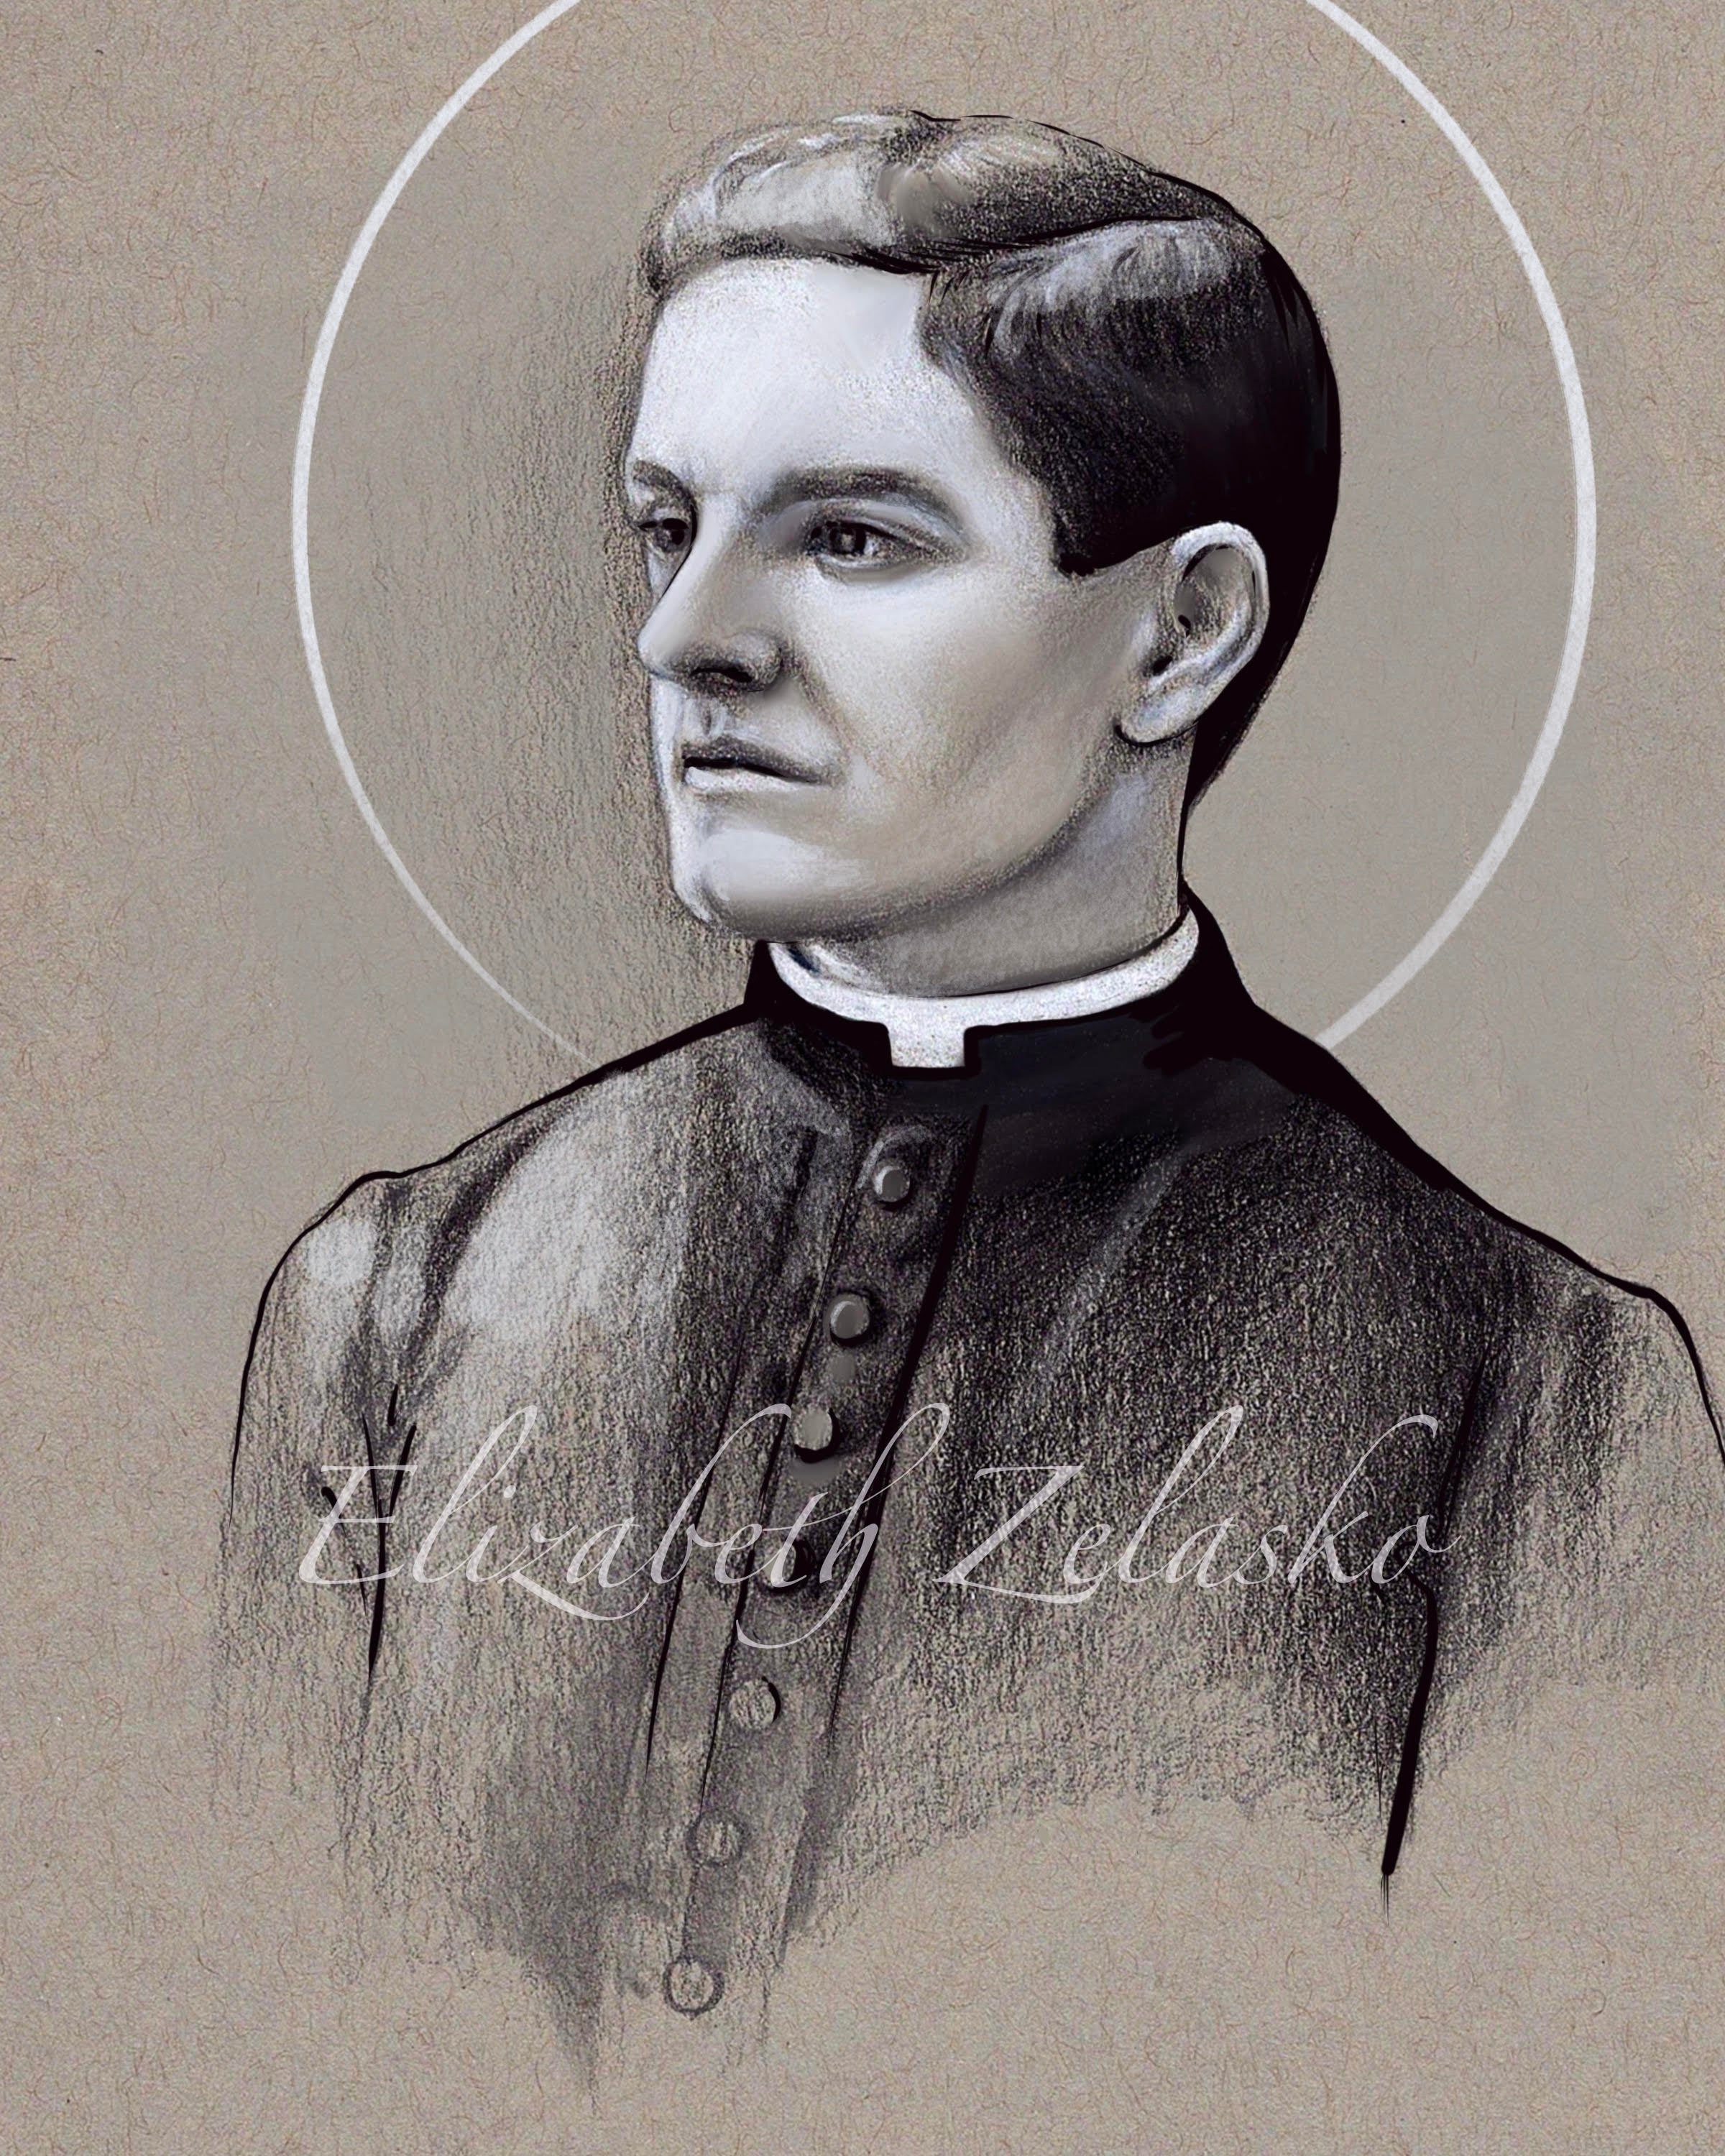 Blessed Father McGivney, founder of the Knights of Columbus